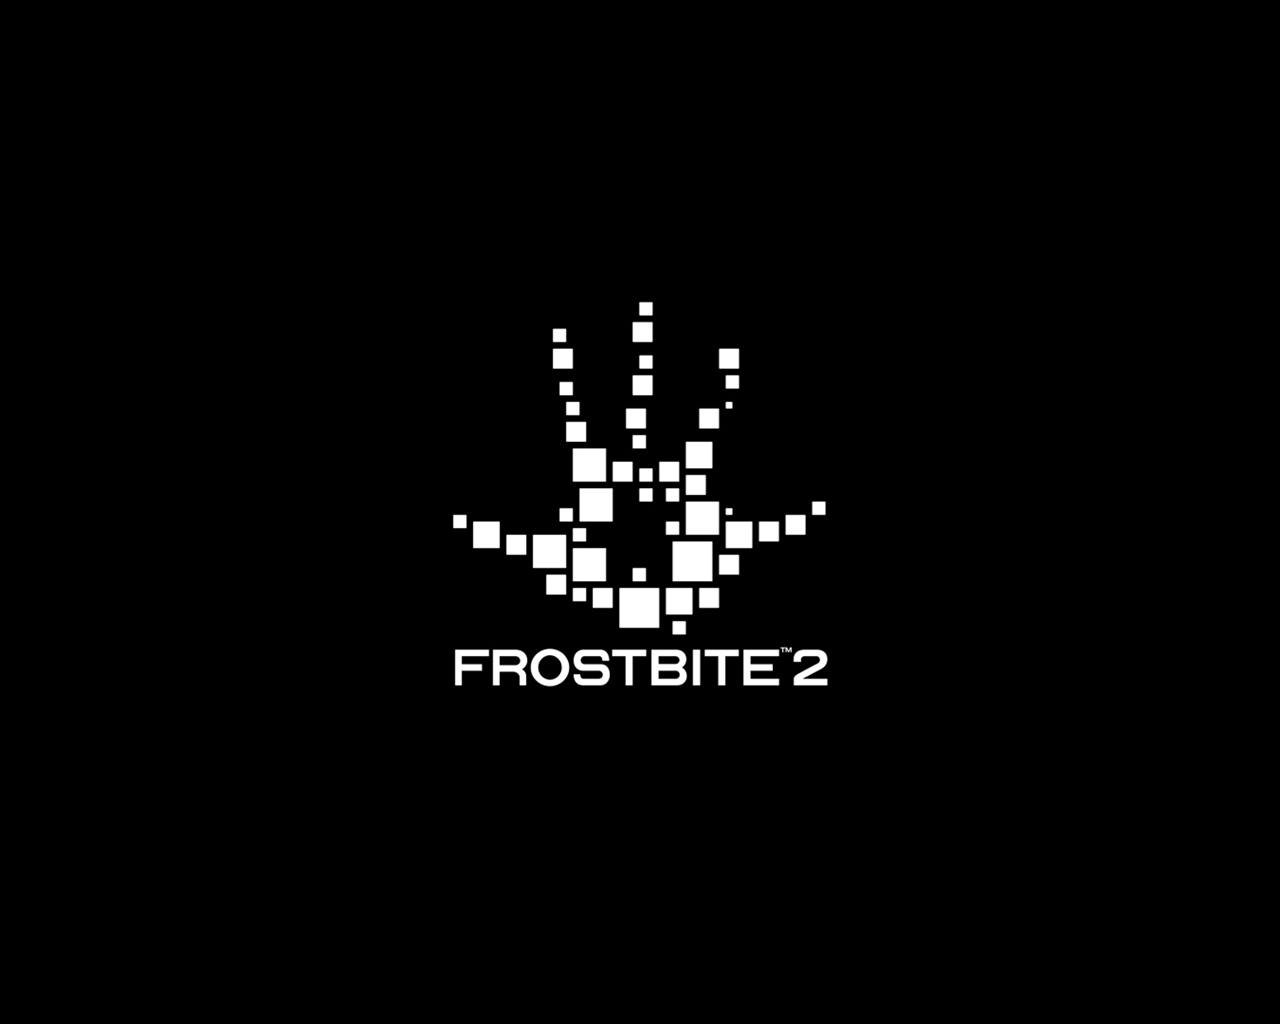 Frostbite 2 for 1280 x 1024 resolution